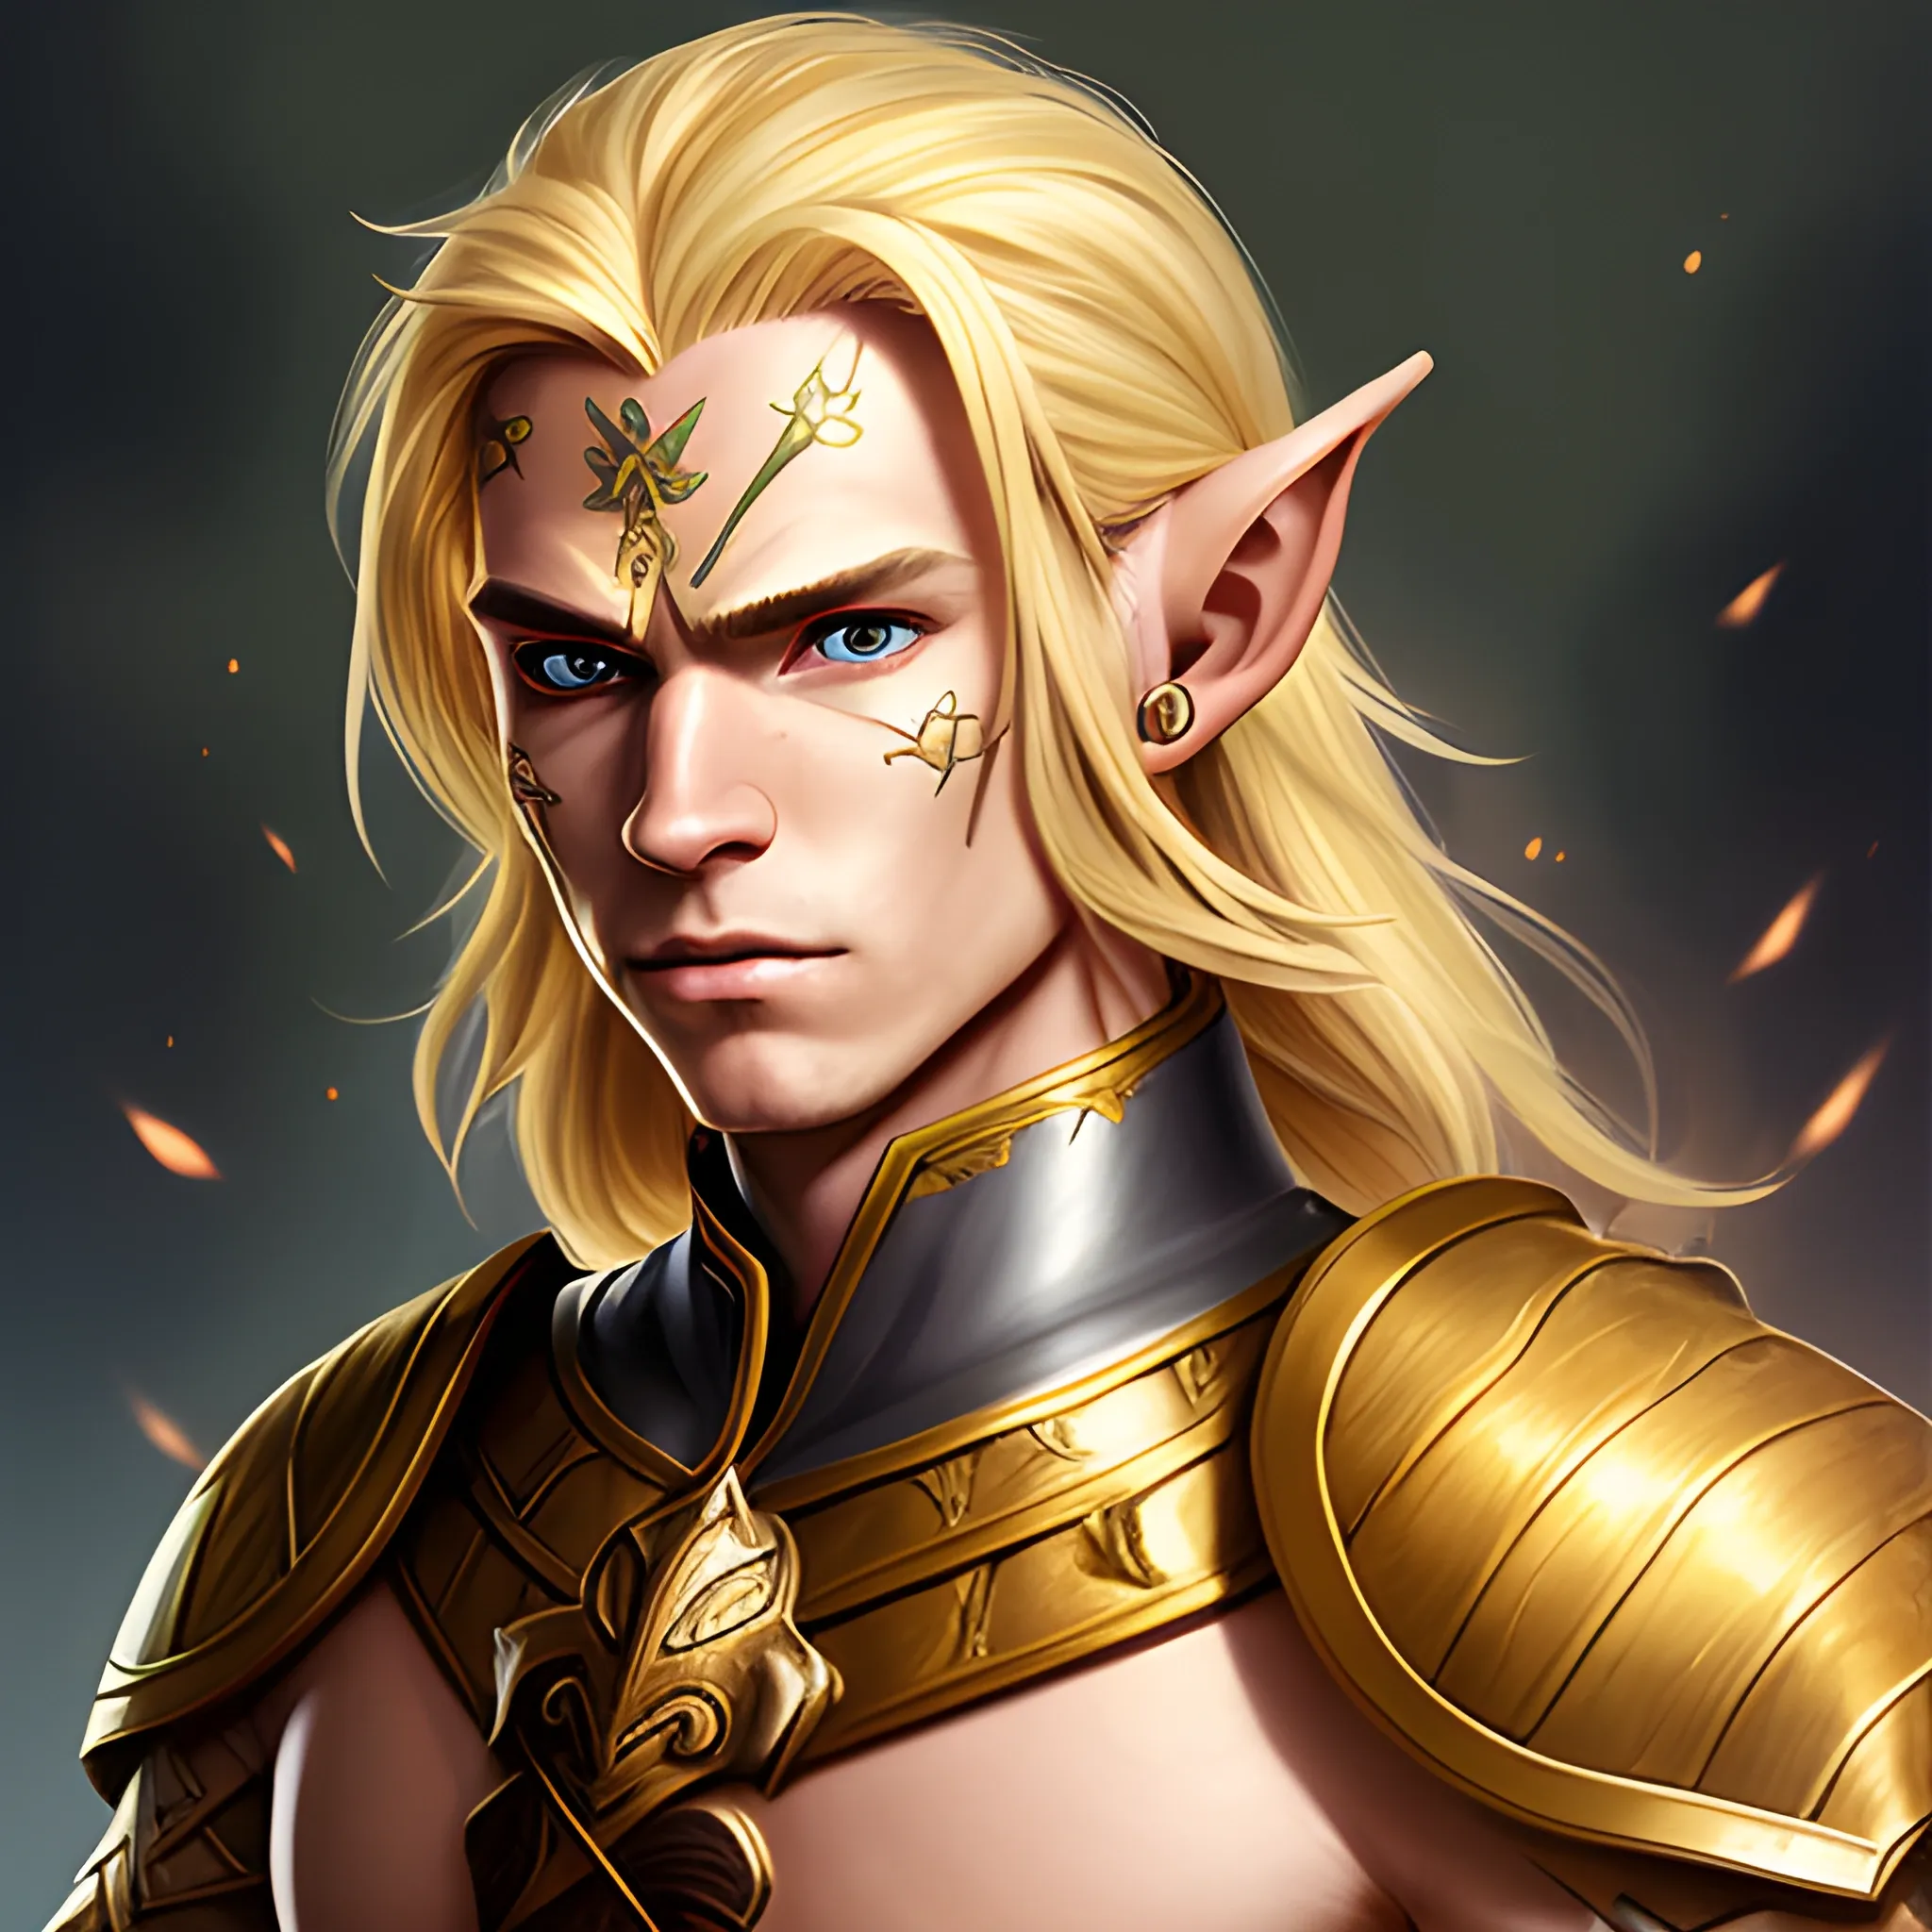 half body portrait, elf, handsome, gold skin, blonde hair, smith, warrior, holy, magical, high fantasy, anime, dynamic stance, highly detailed, whimsical, energy, fire, hammer weapon